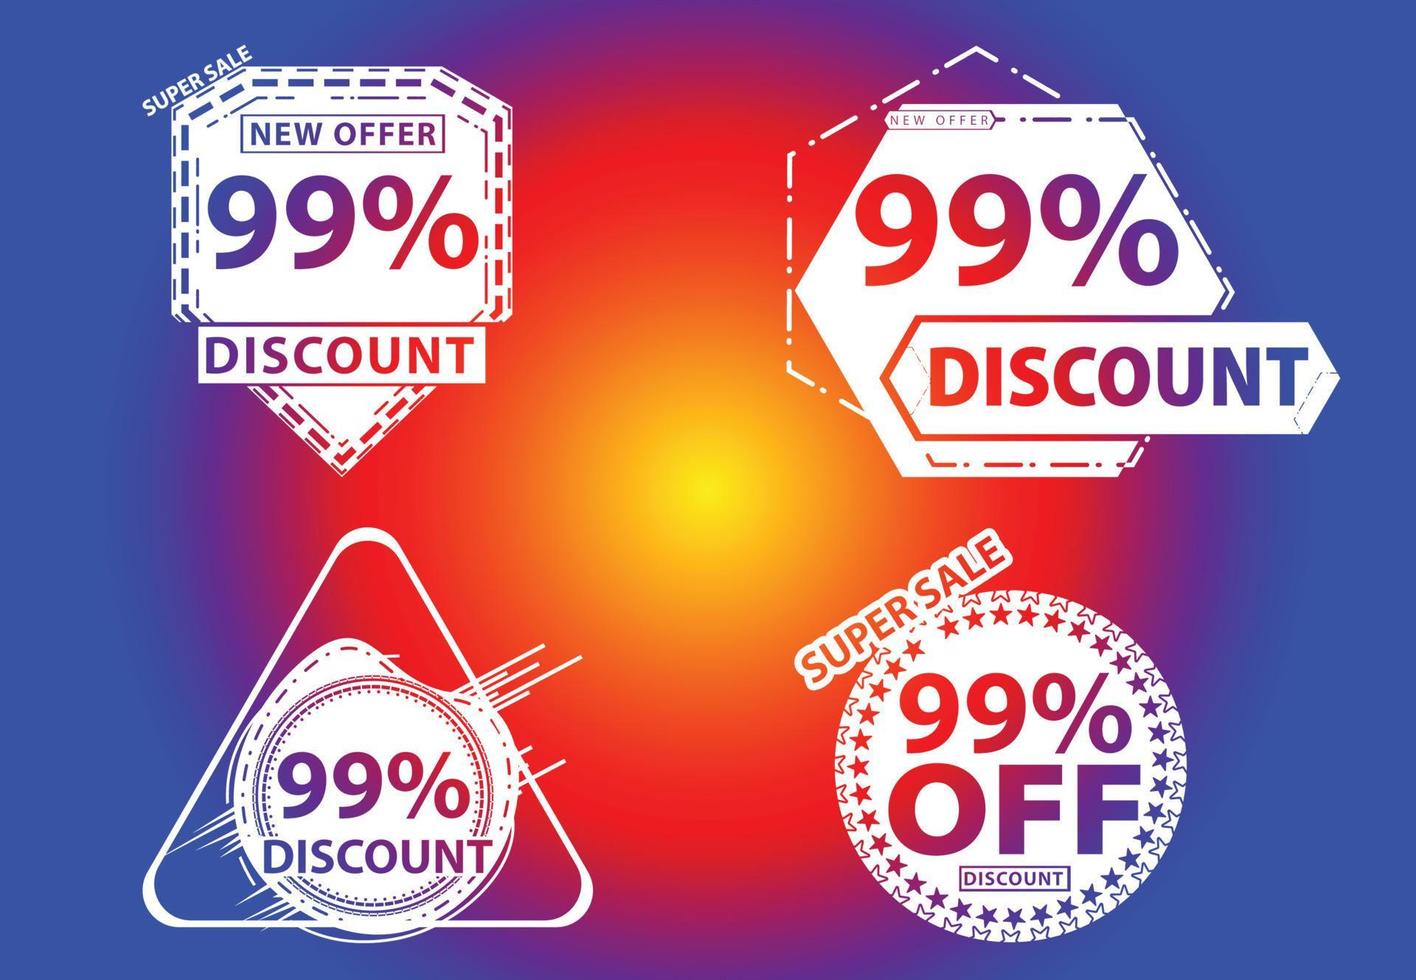 99 percent off new offer logo and icon design template vector